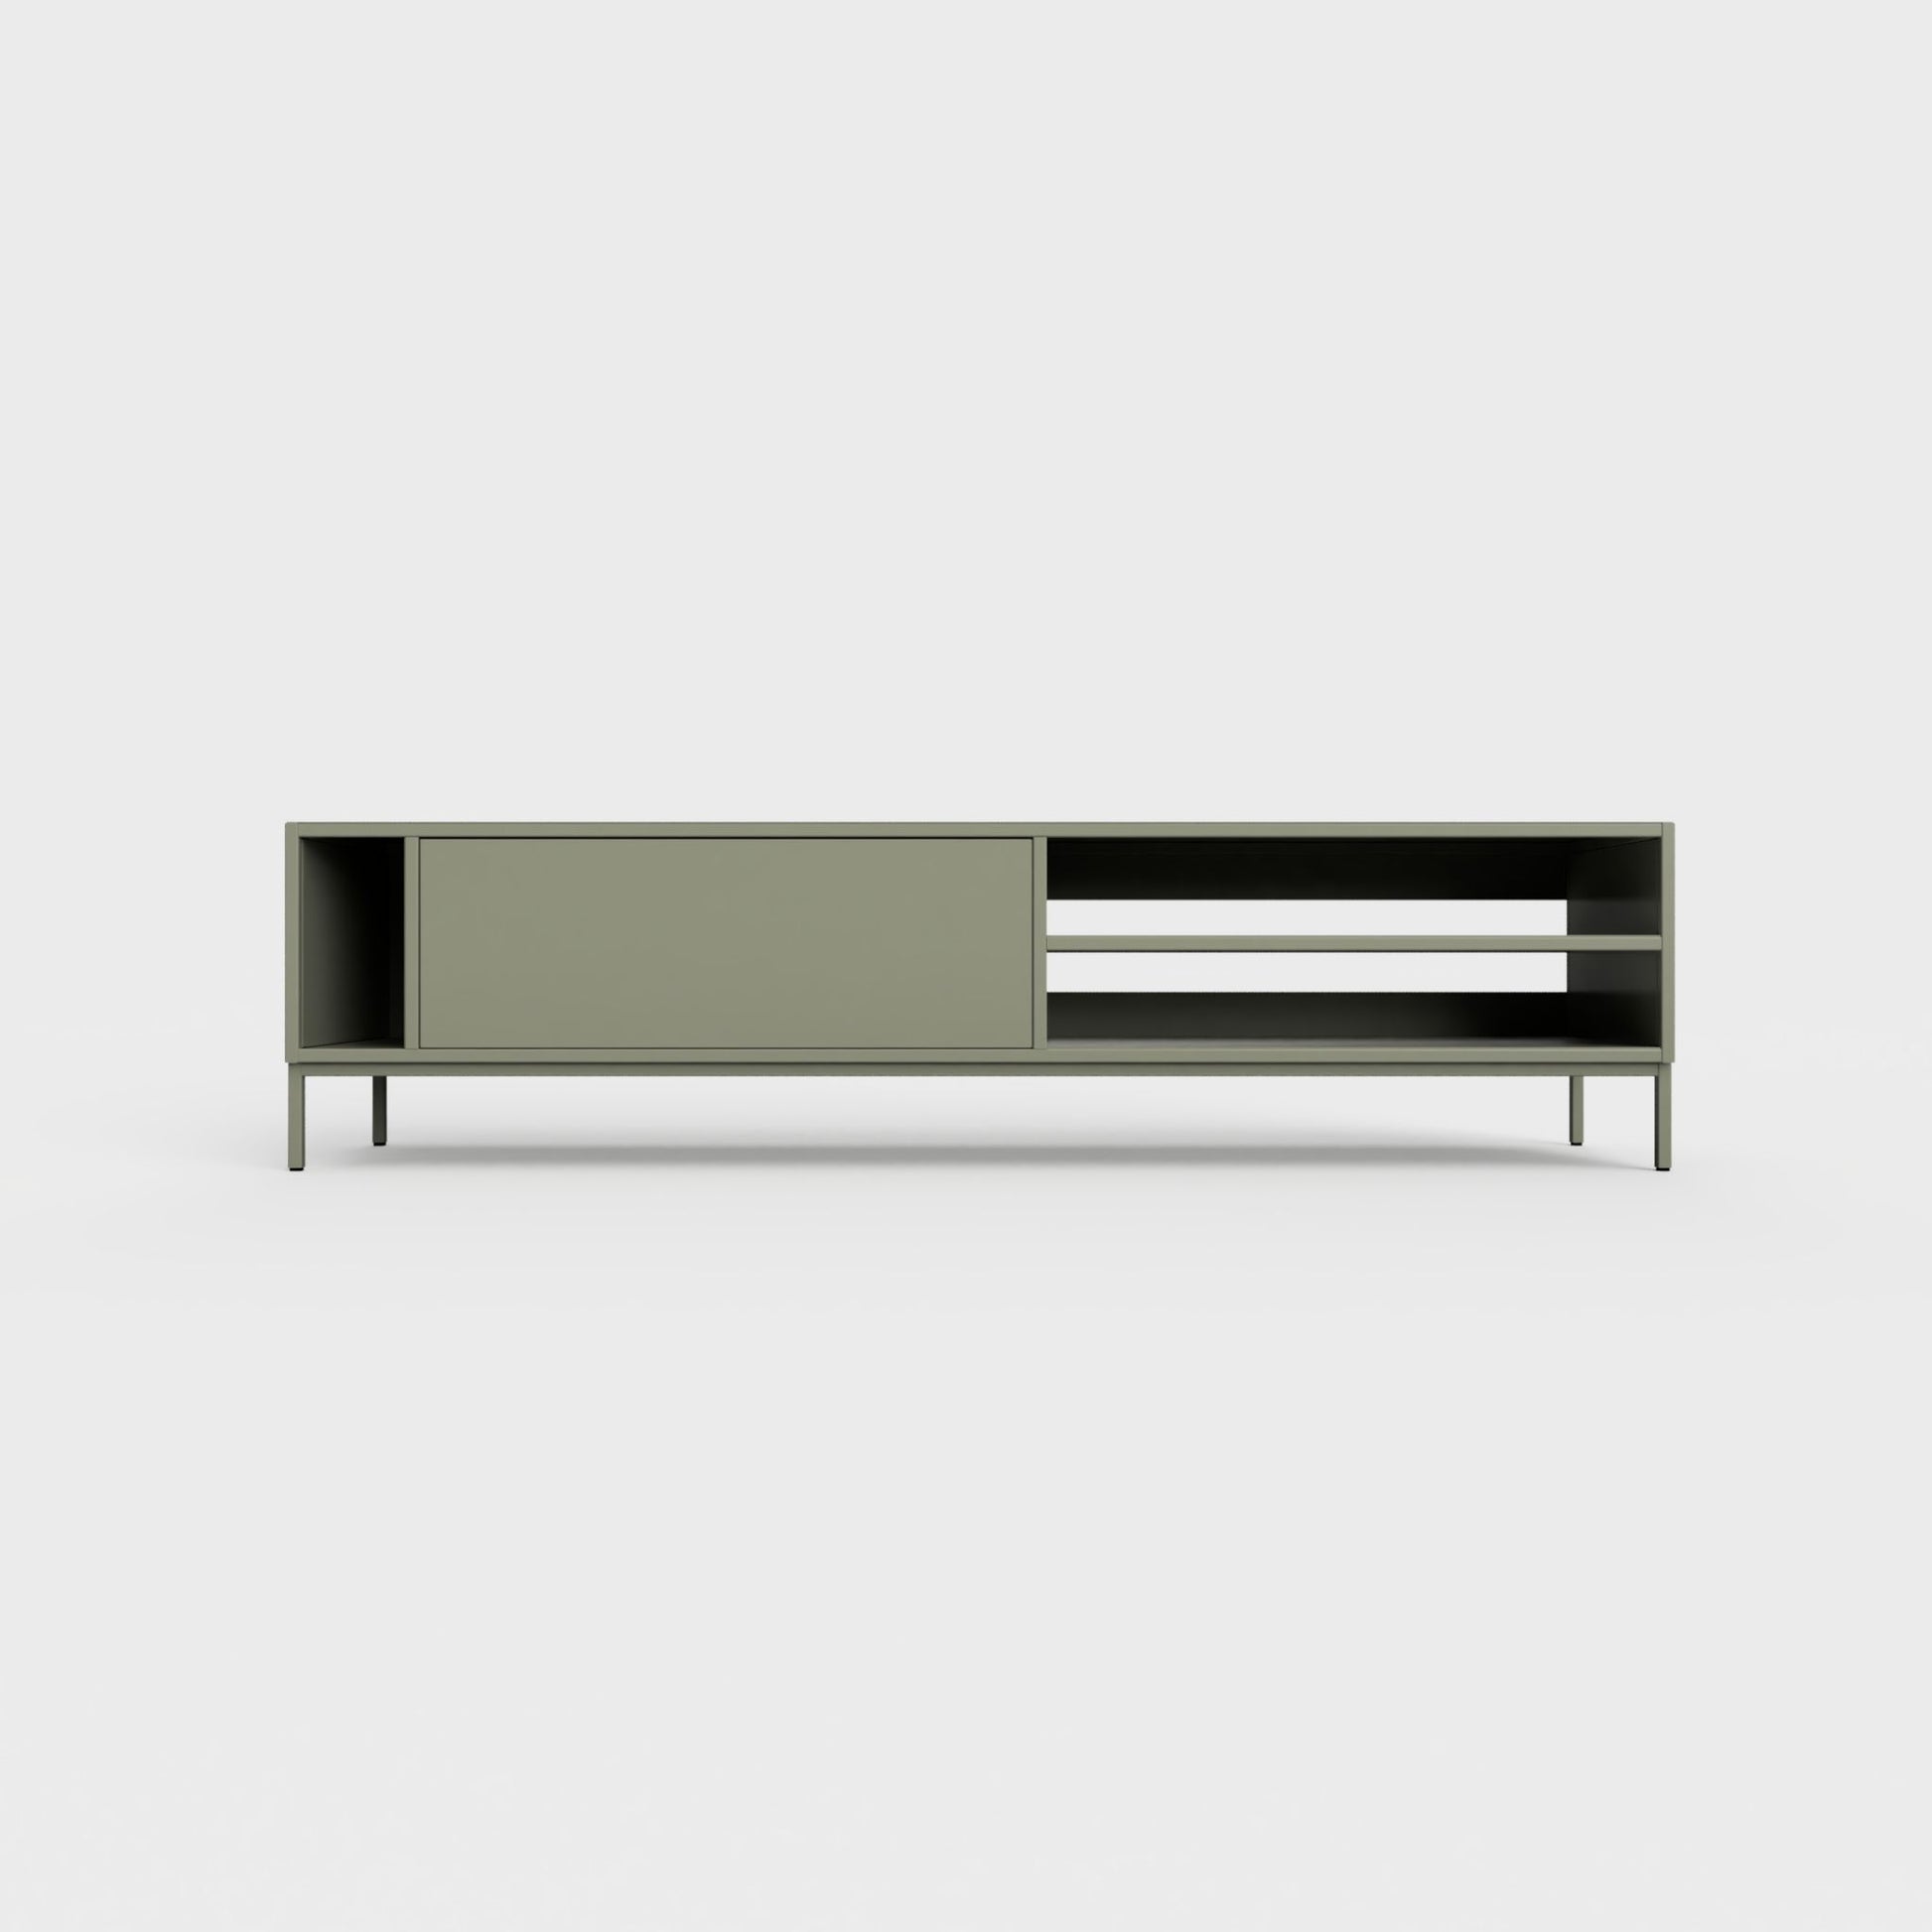 Prunus 03 Lowboard in faded olive green color, powder-coated steel, elegant and modern piece of furniture for your living room